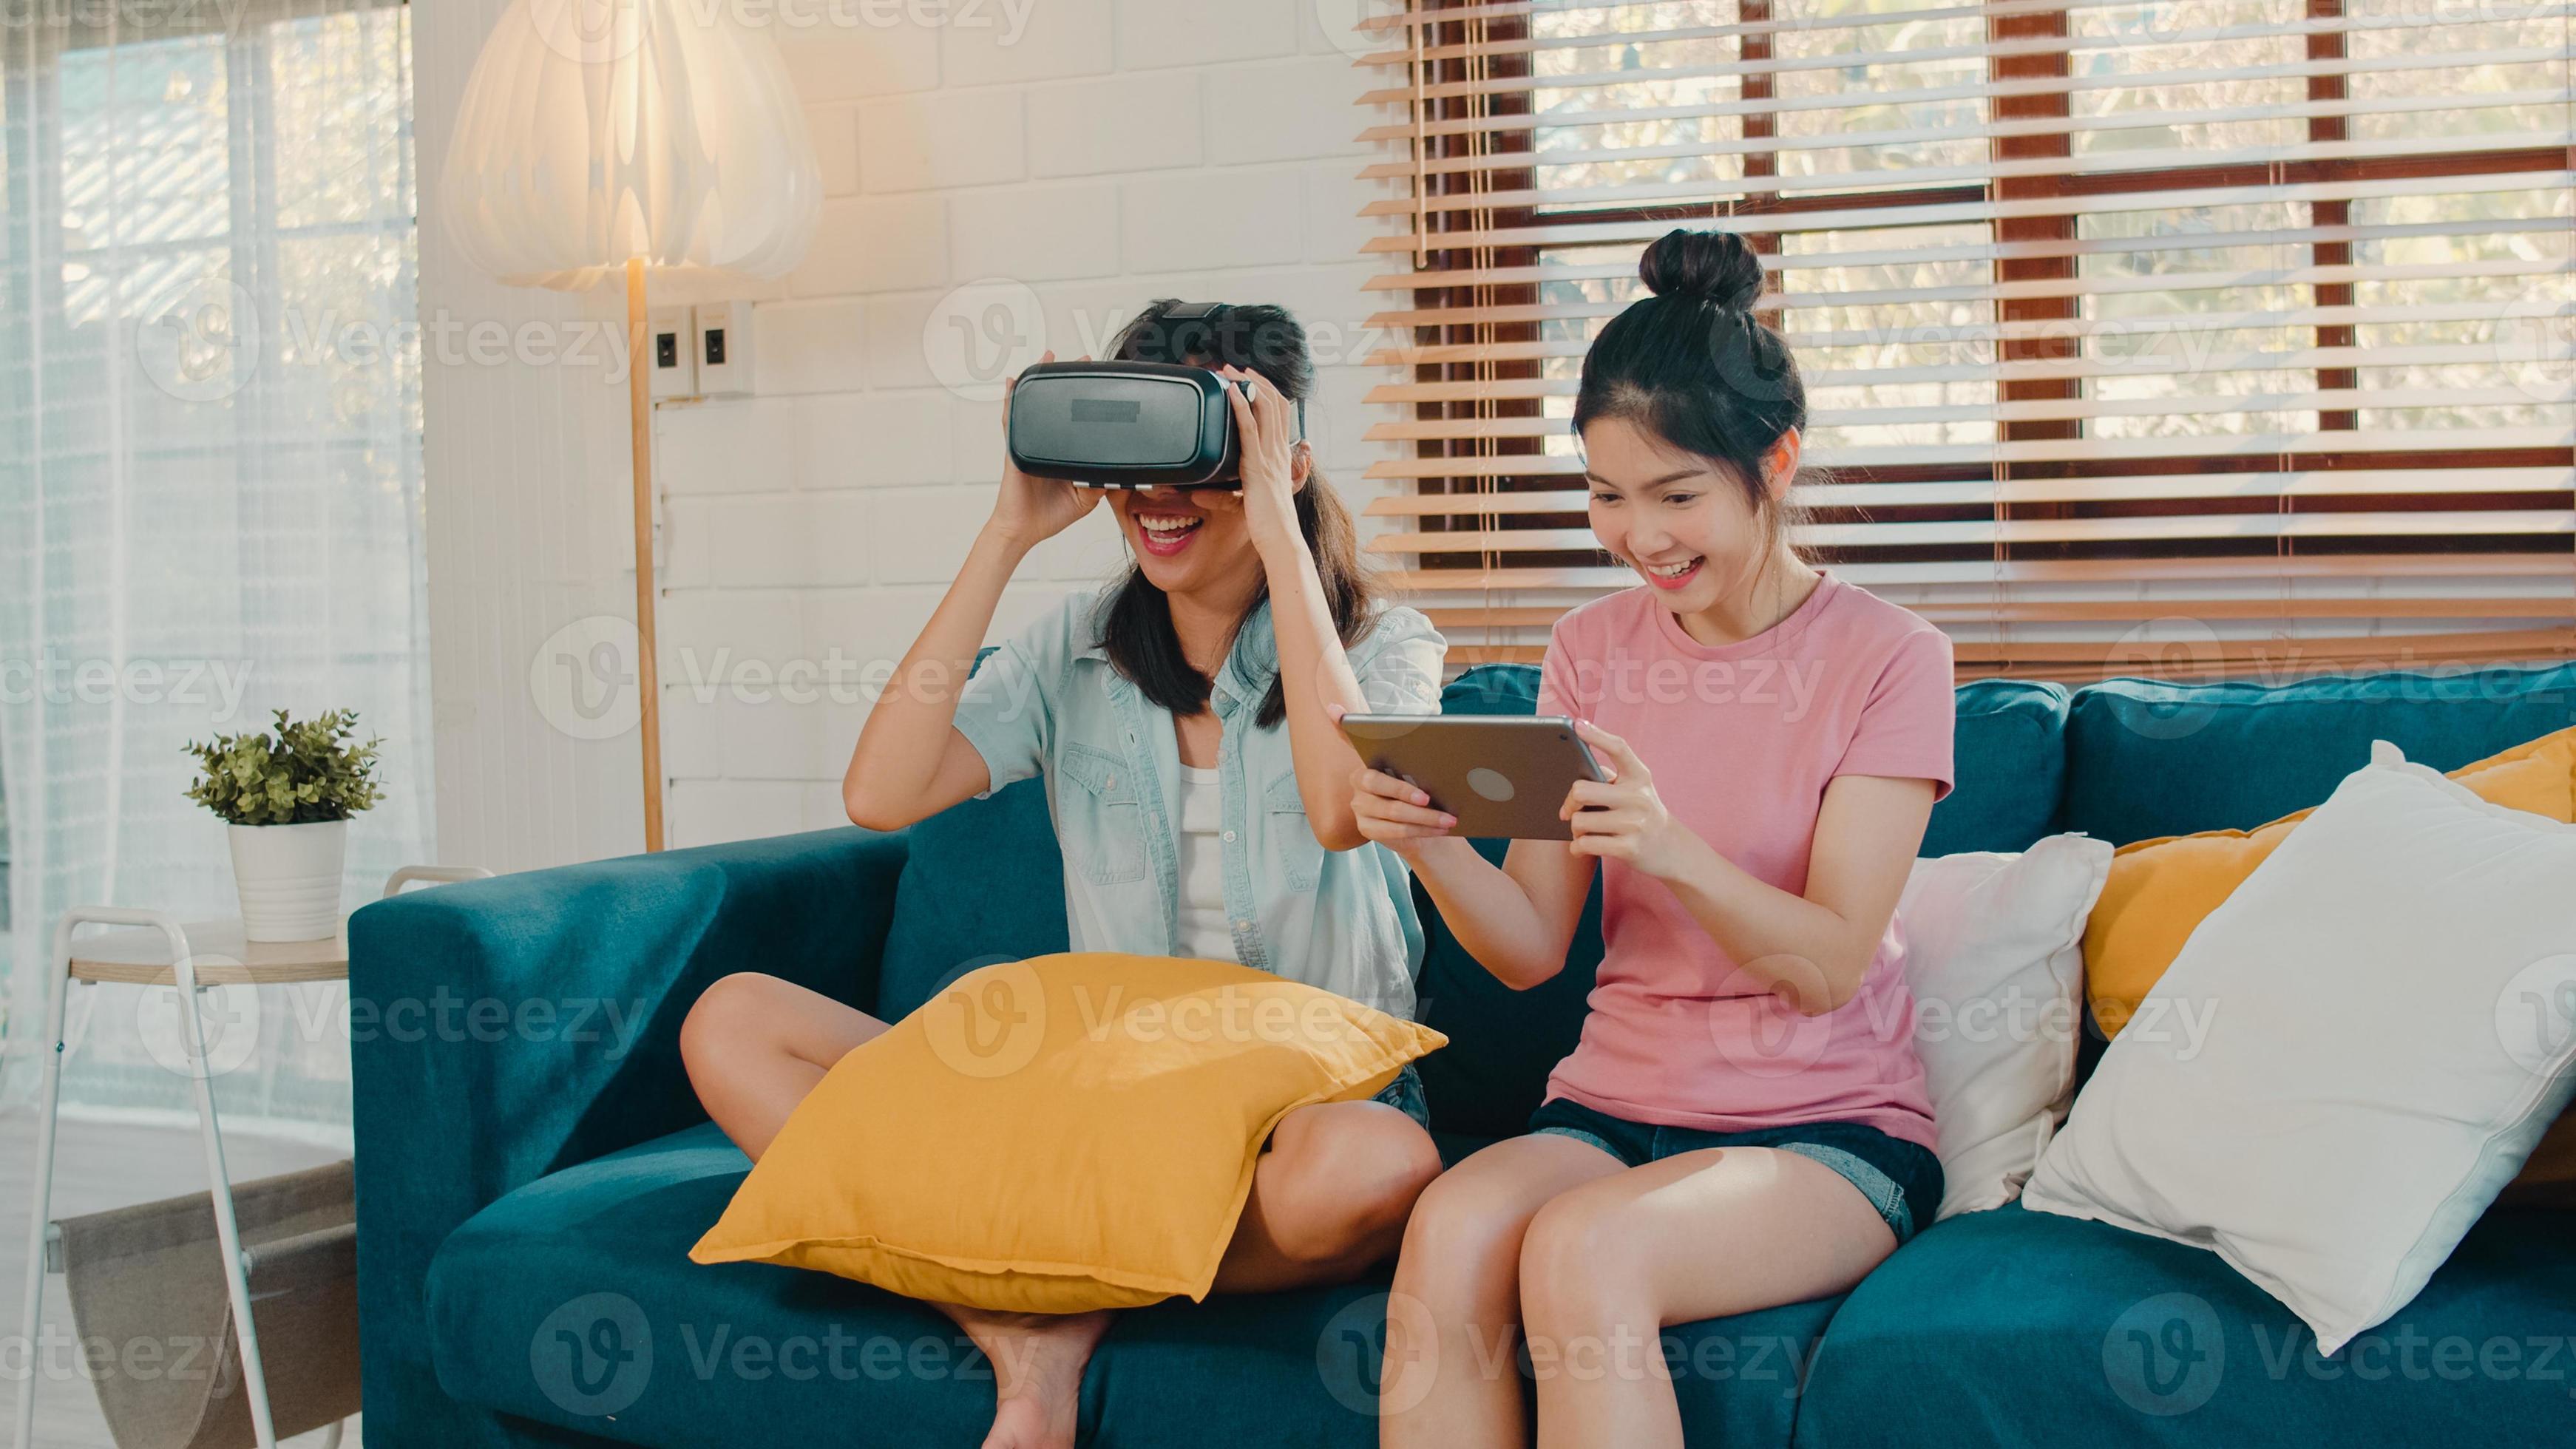 præsentation bruger regional Young Lesbian lgbtq Asian women couple using tablet at home, Asian lover  female feeling happy fun and virtual reality, VR playing games together  while lying sofa in living room at home concept.